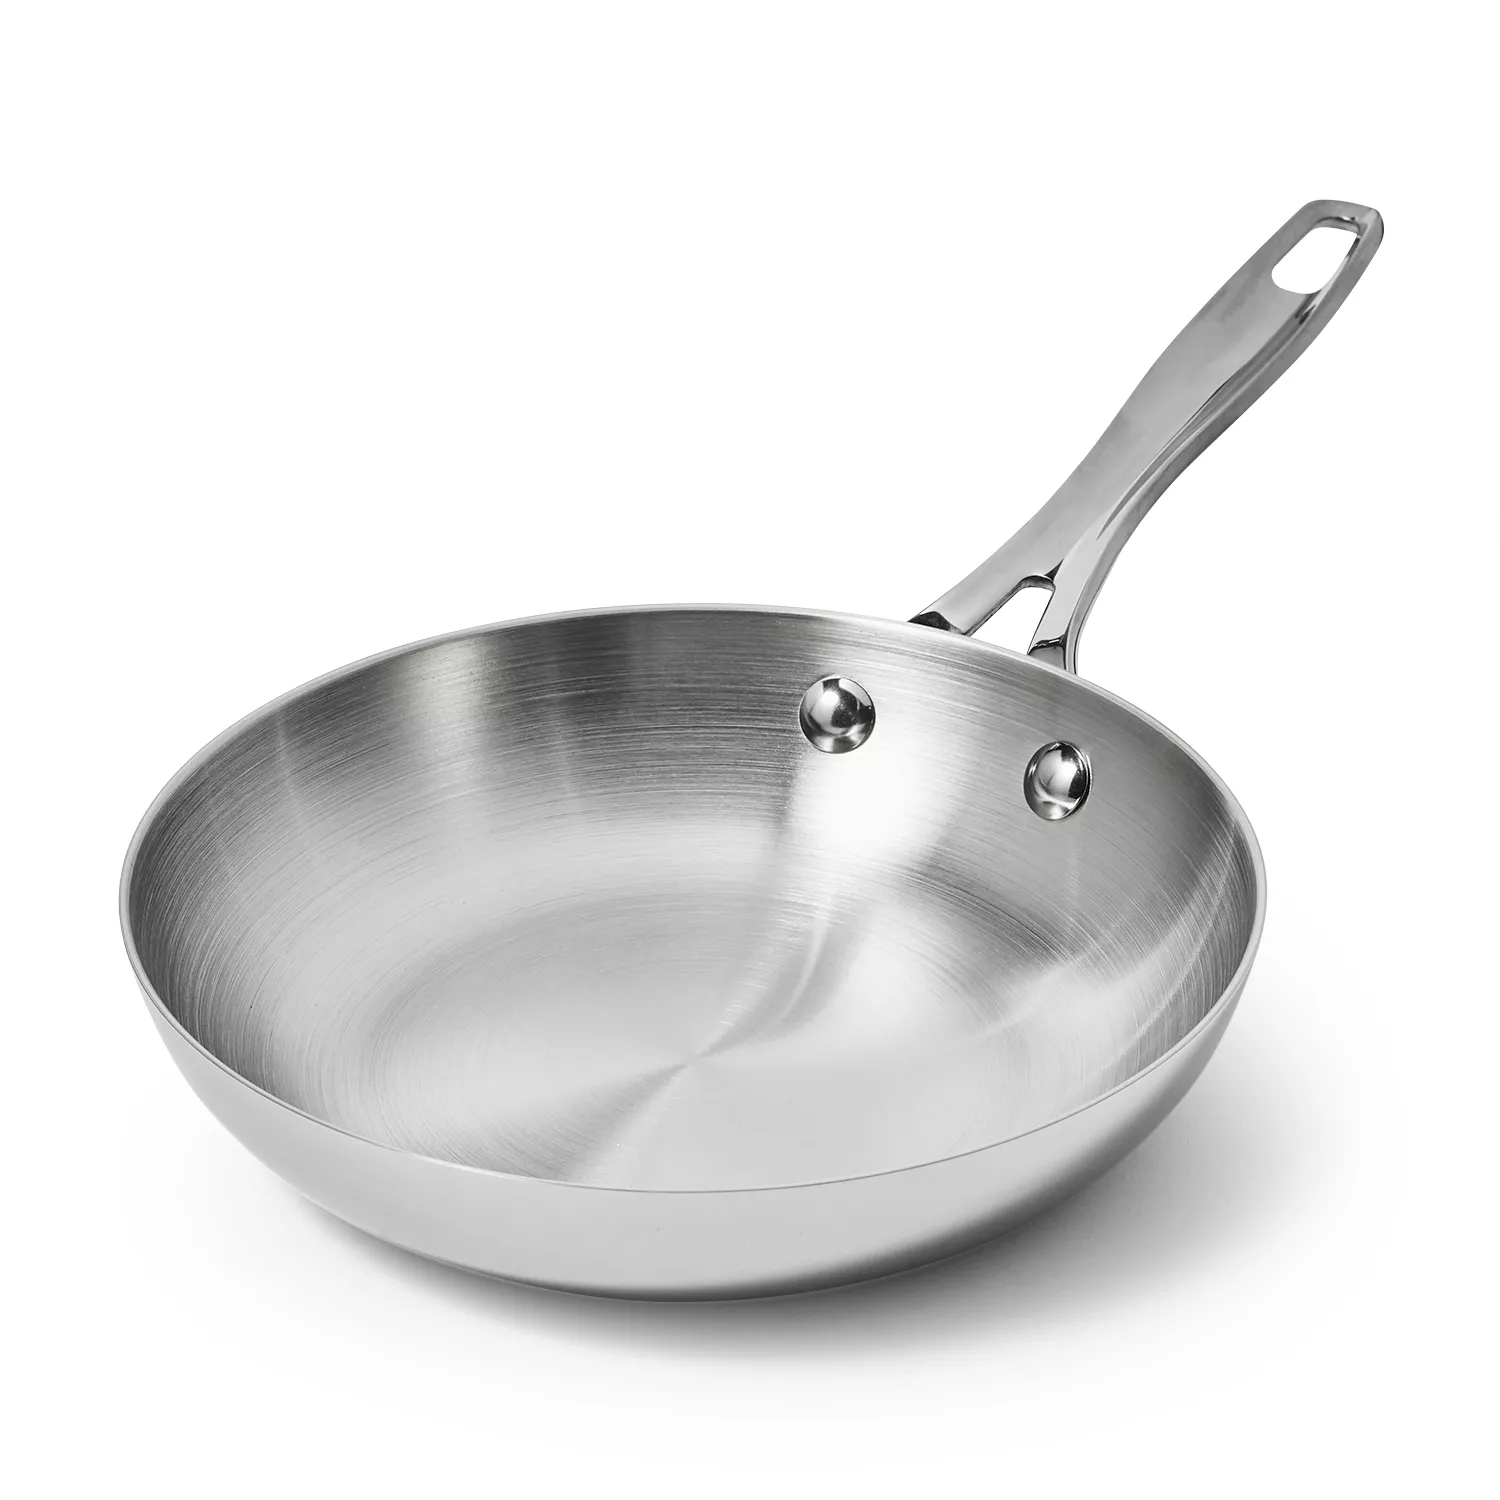 Sur La Table Classic 5-Ply Stainless Steel Skillet, 12, Silver